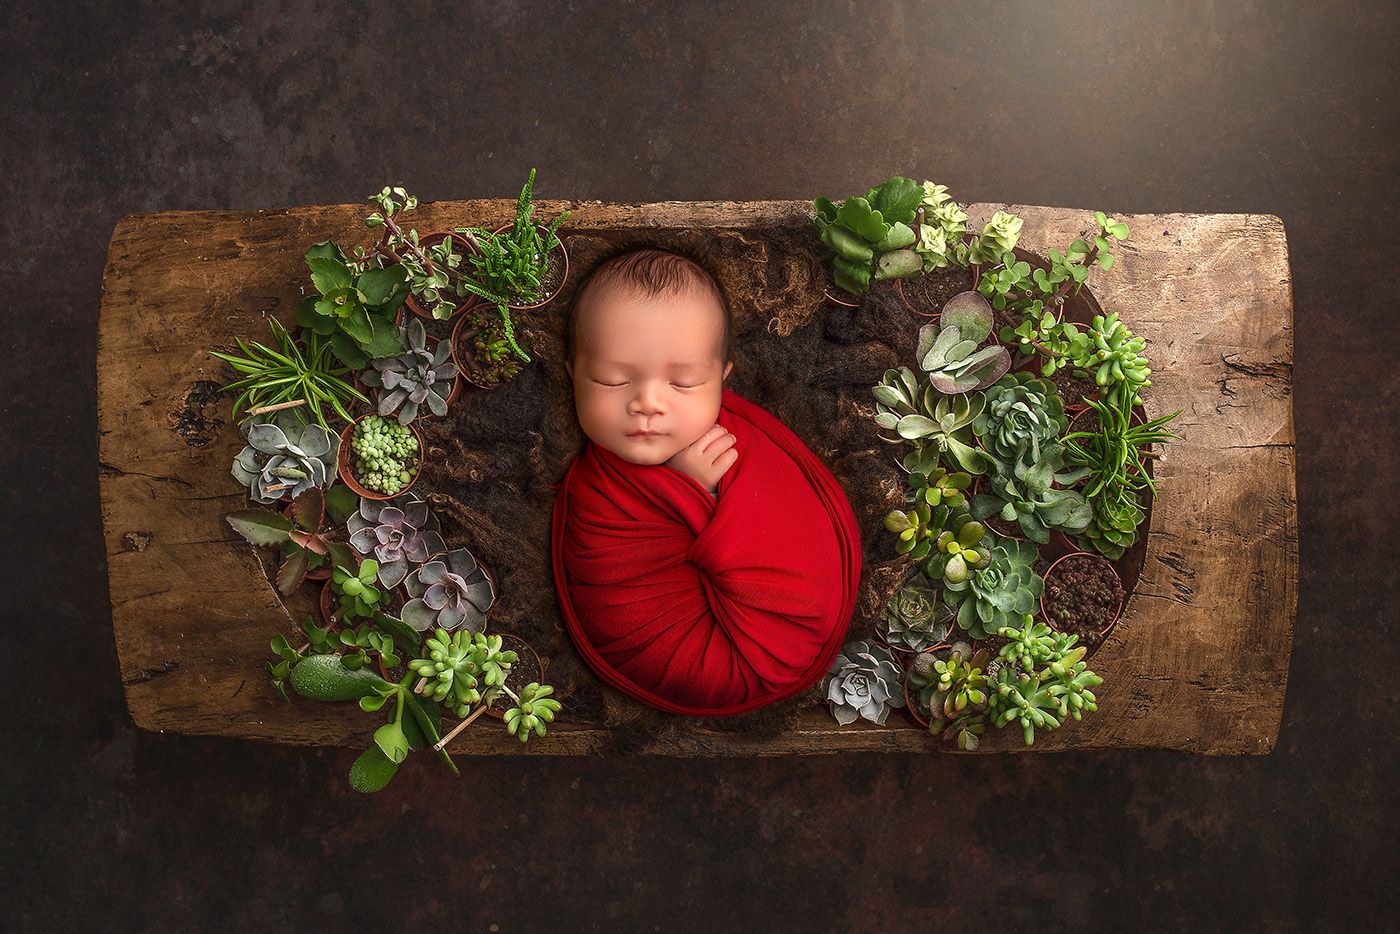 Vibrant Newborn Photos newborn baby swaddled in bright red sleeping in a bowl of succulents